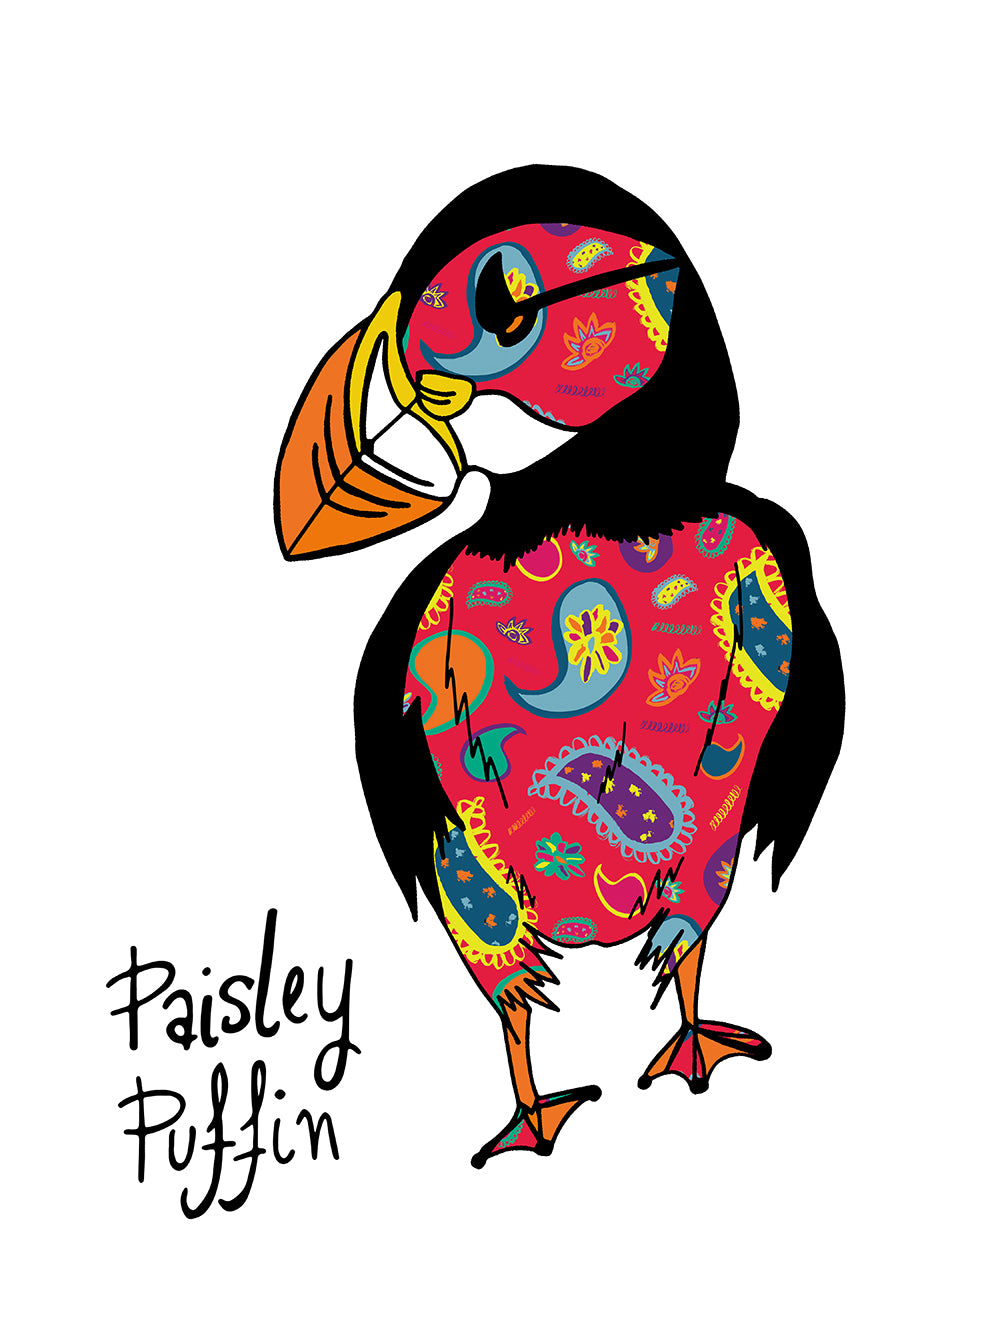 PAISLEY PUFFIN A4 illustration - Red